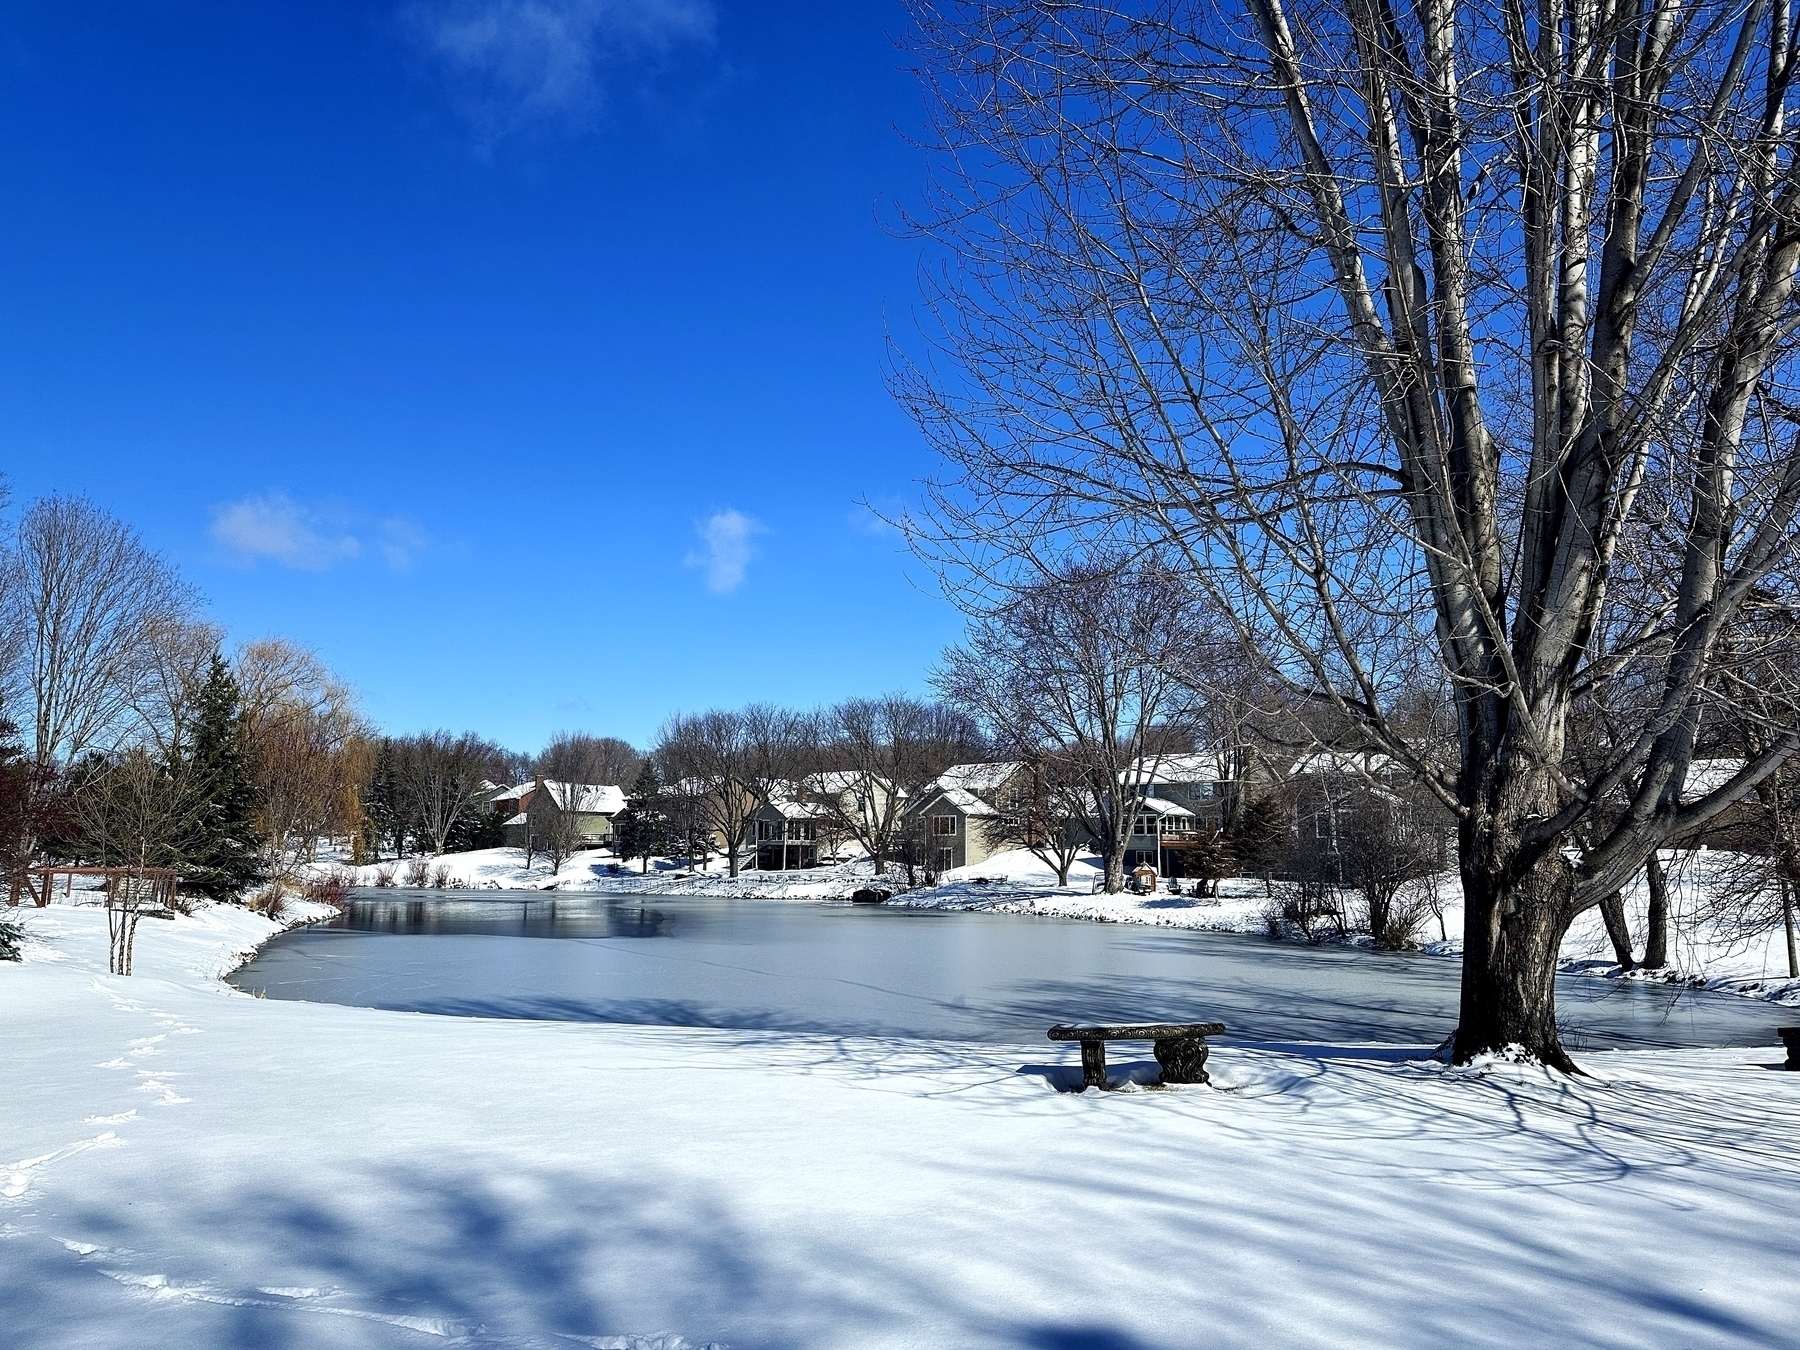 A snow-covered landscape with a frozen pond, bare trees, and residential houses under a clear blue sky. Shadows stretch across the snow.